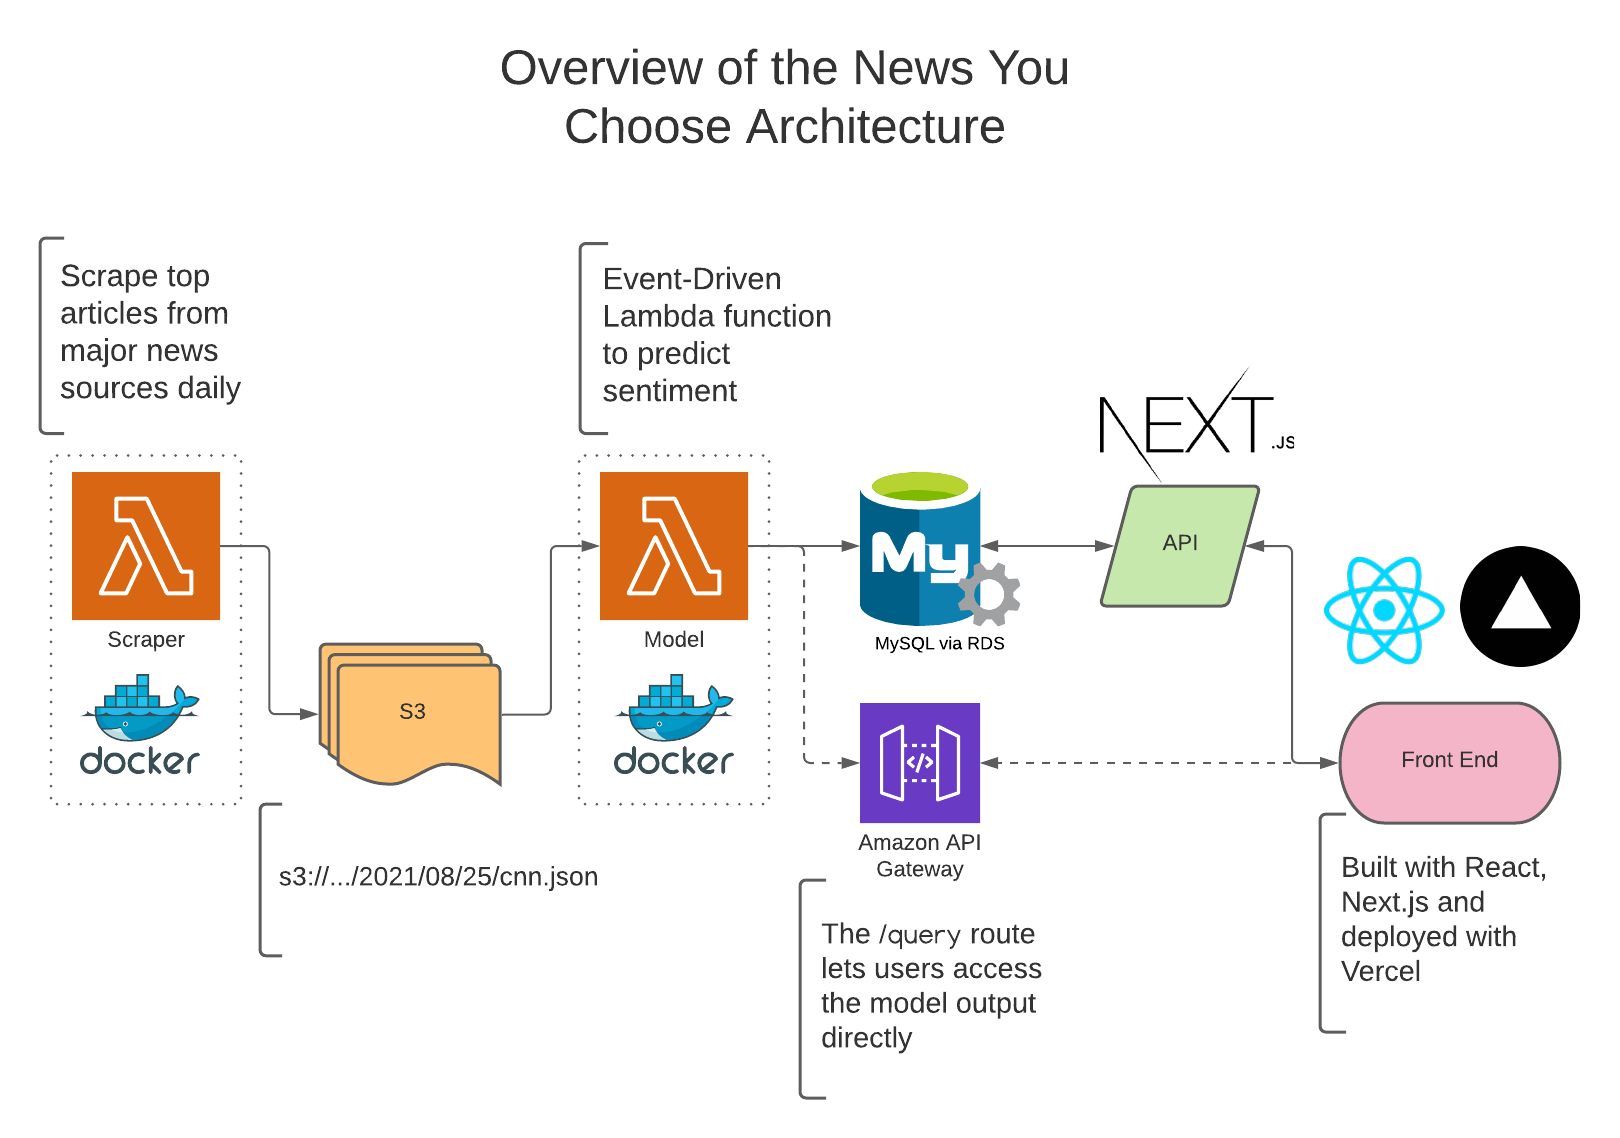 Overview of News You Choose